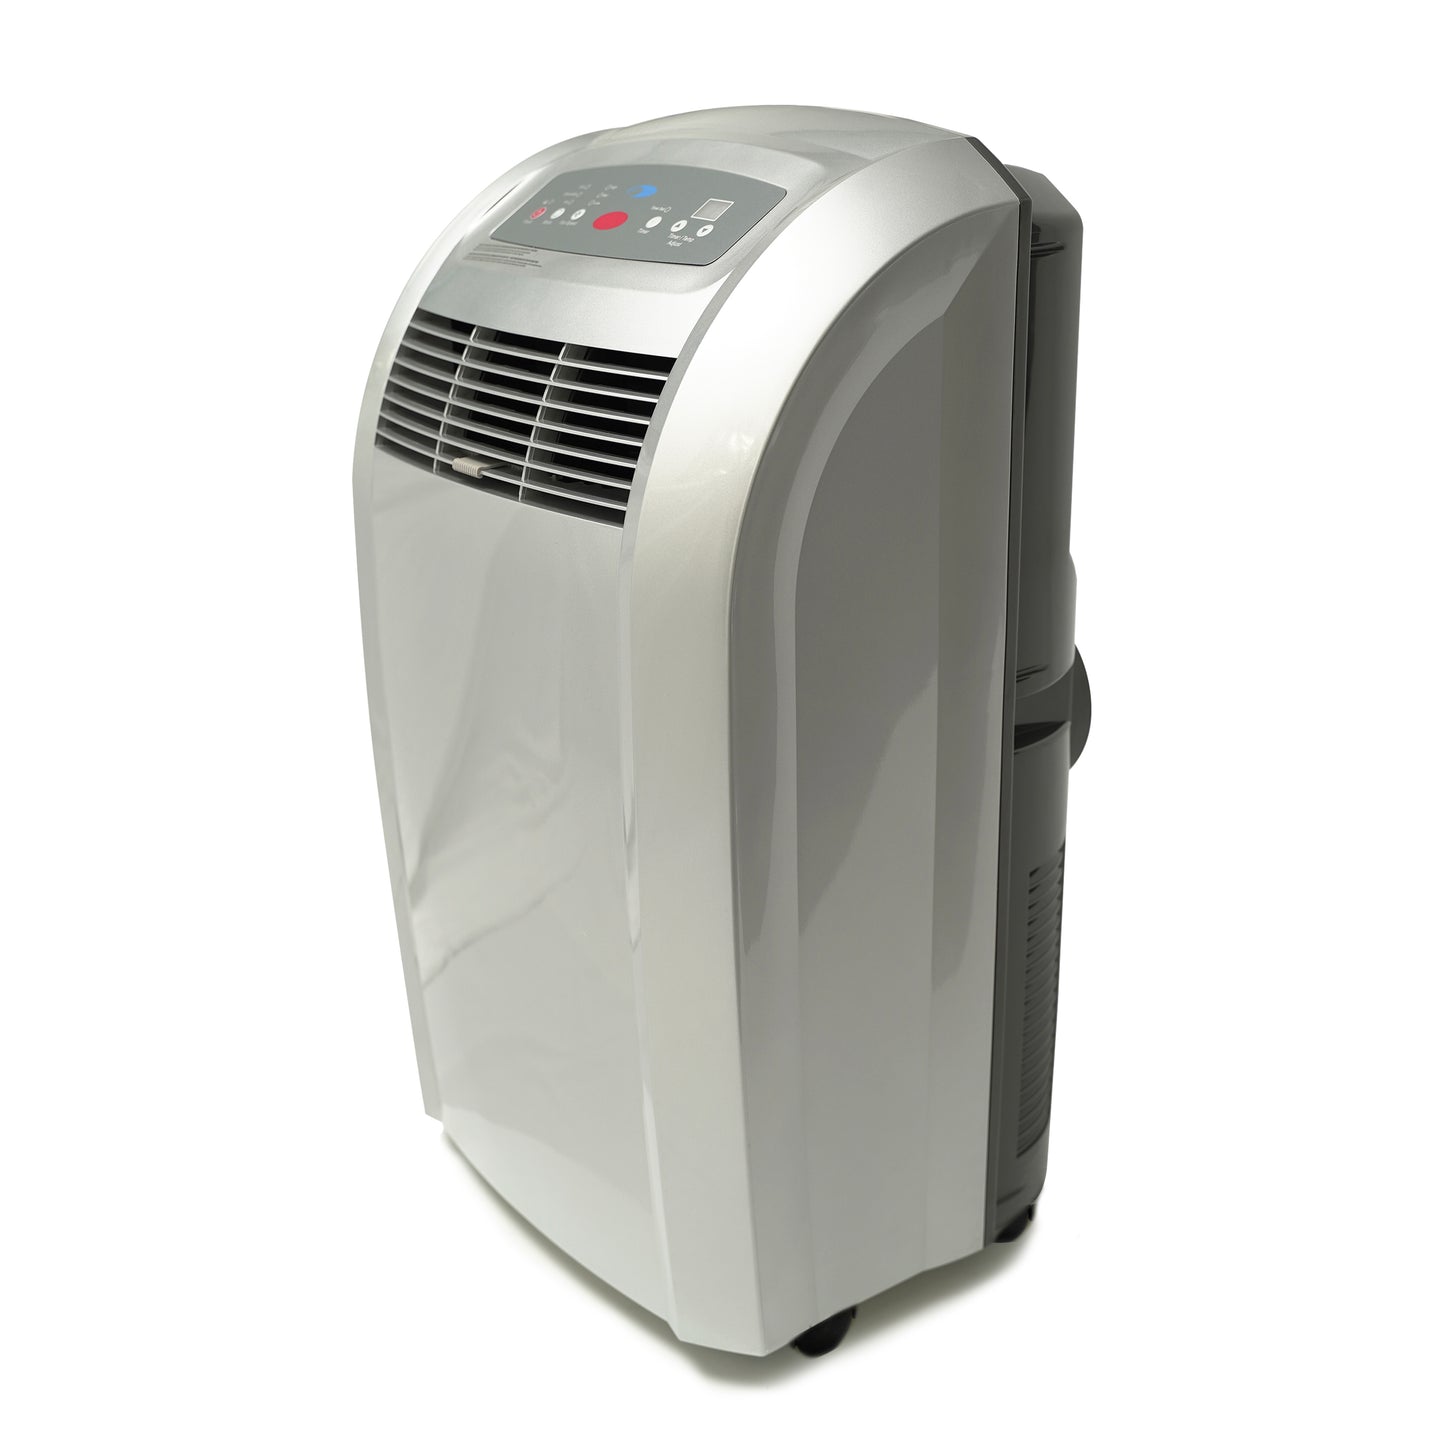 A silver portable air conditioner with a carbon filter, 12,000 BTU, and eco-friendly features.